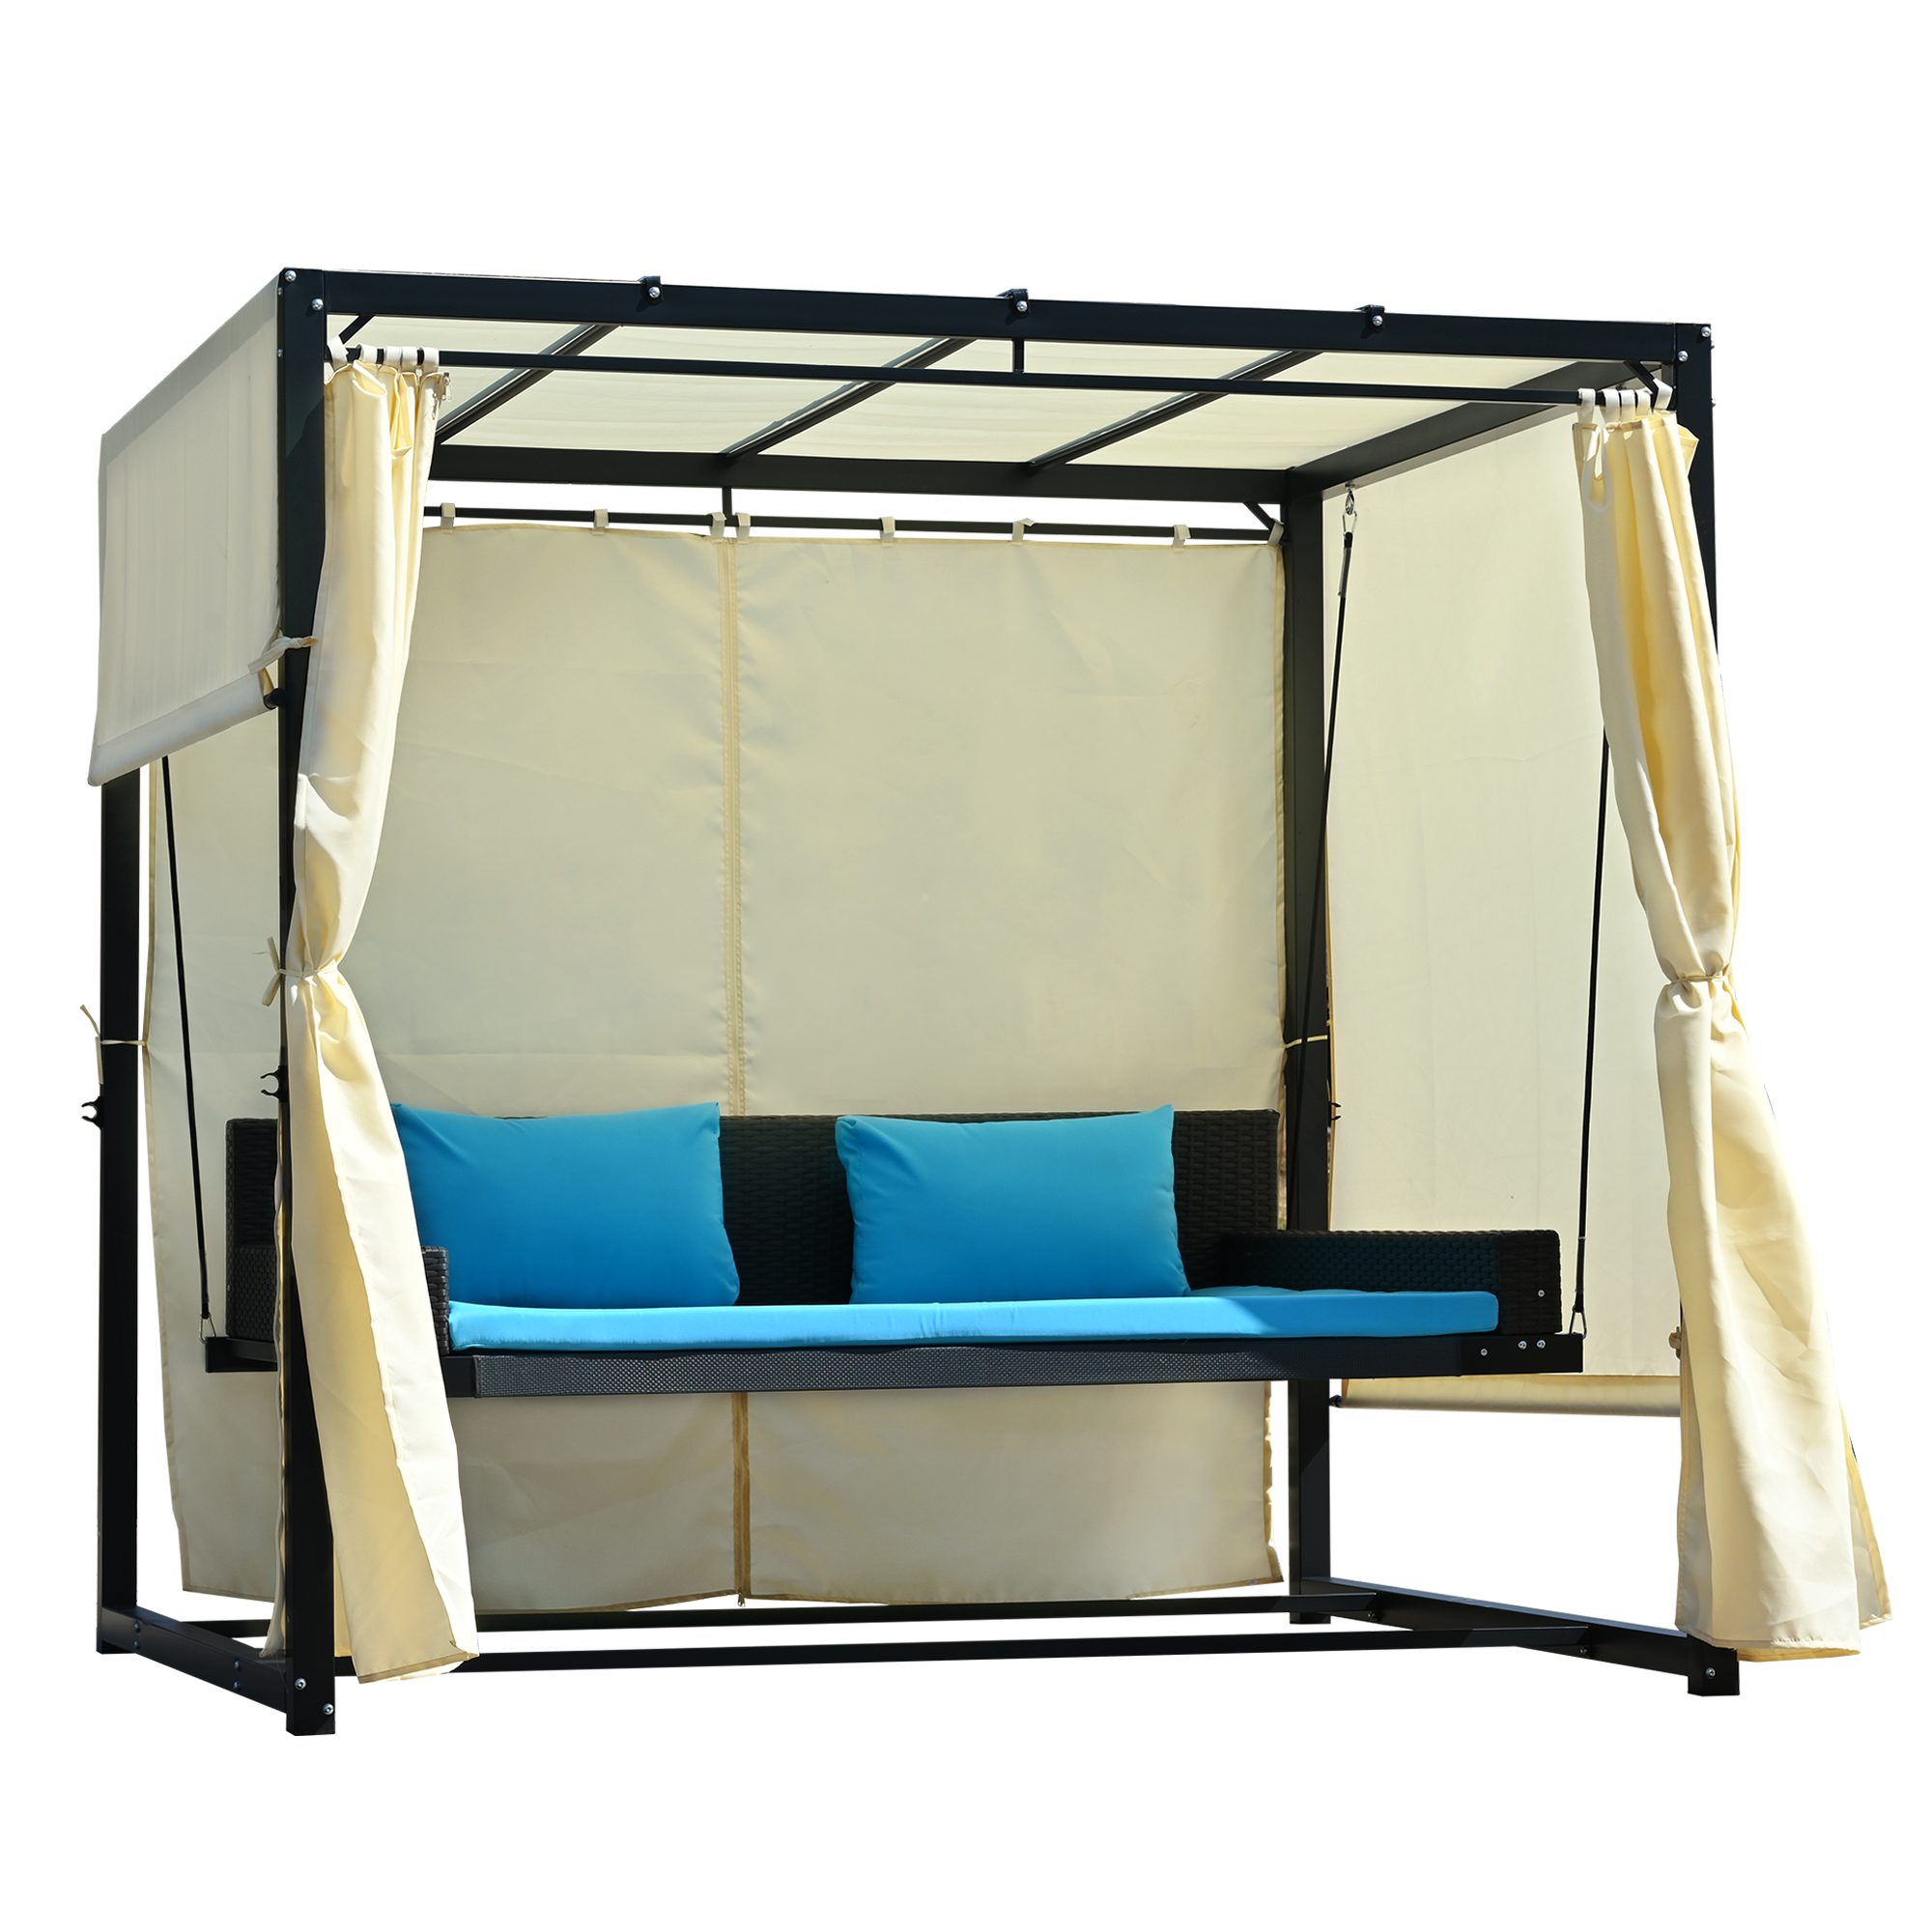 [VIDEO provided]2-3 People Outdoor Swing Bed,Adjustable Curtains,Suitable For Balconies, Gardens And Other Places - image 5 of 9